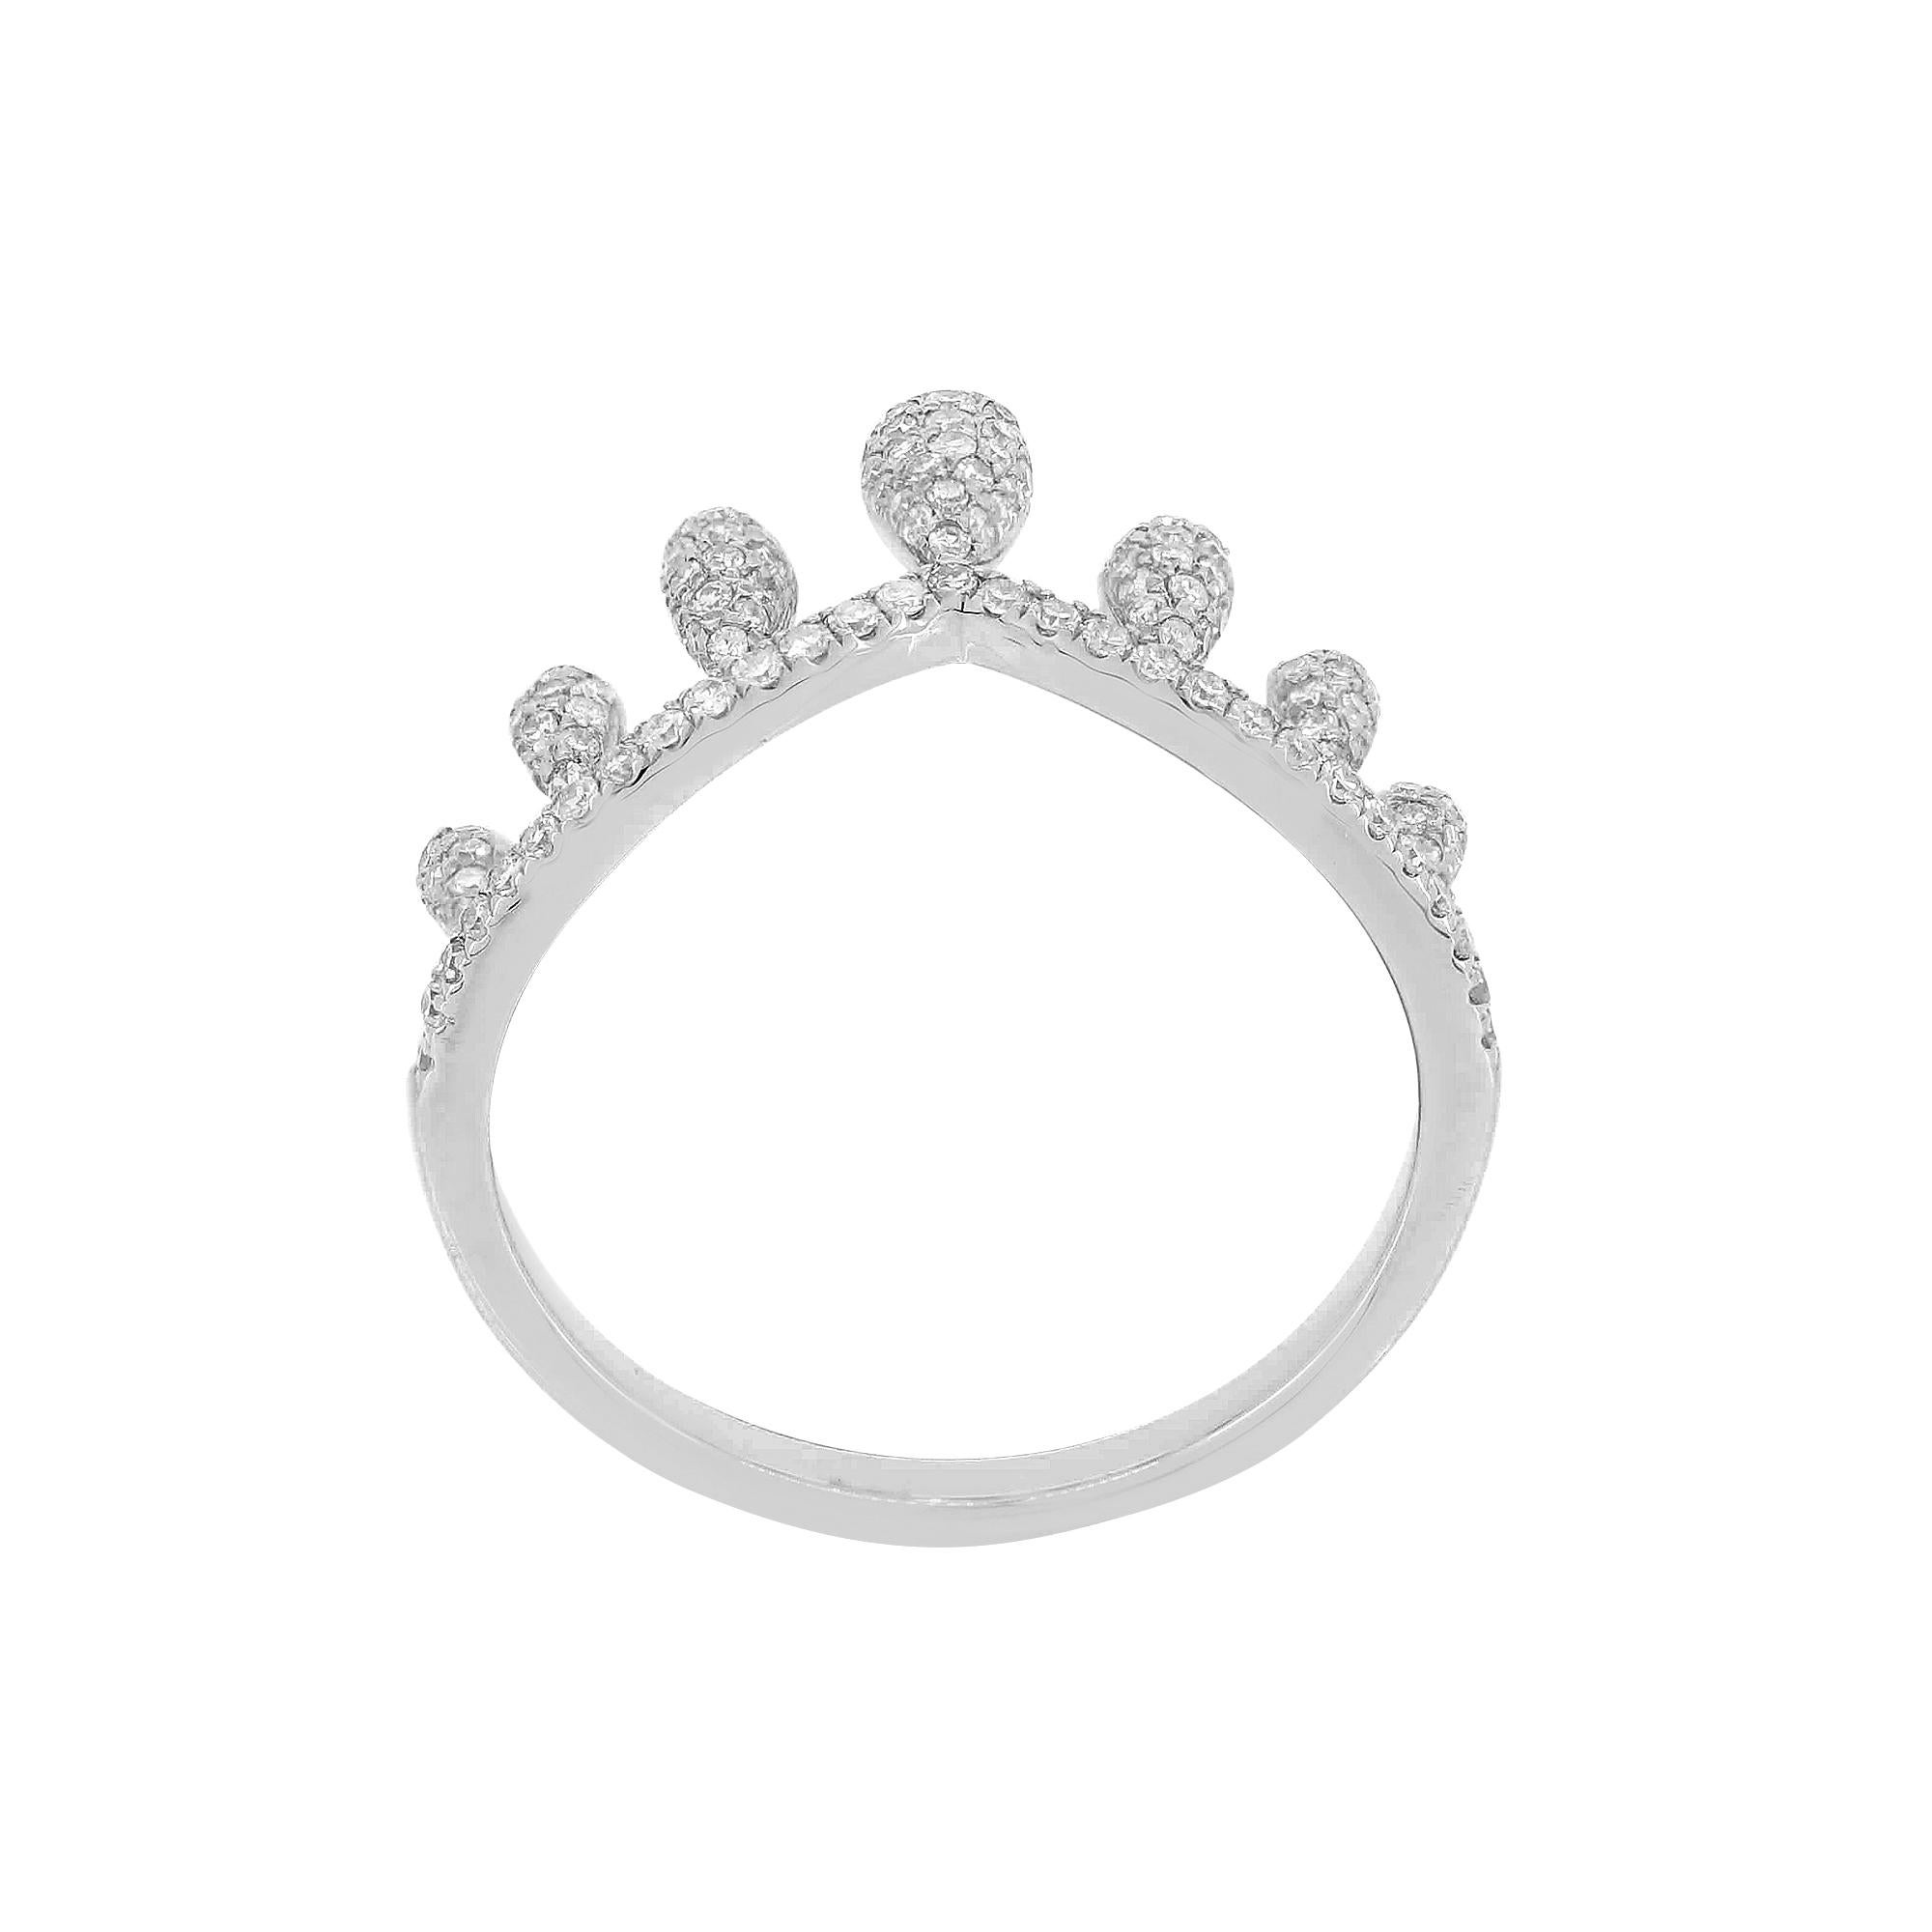 This stunning crown ring is featured with round cut diamonds set in pear shaped motifs graduating on both ends. Each ring is made with 145 round diamonds in micro pave setting.